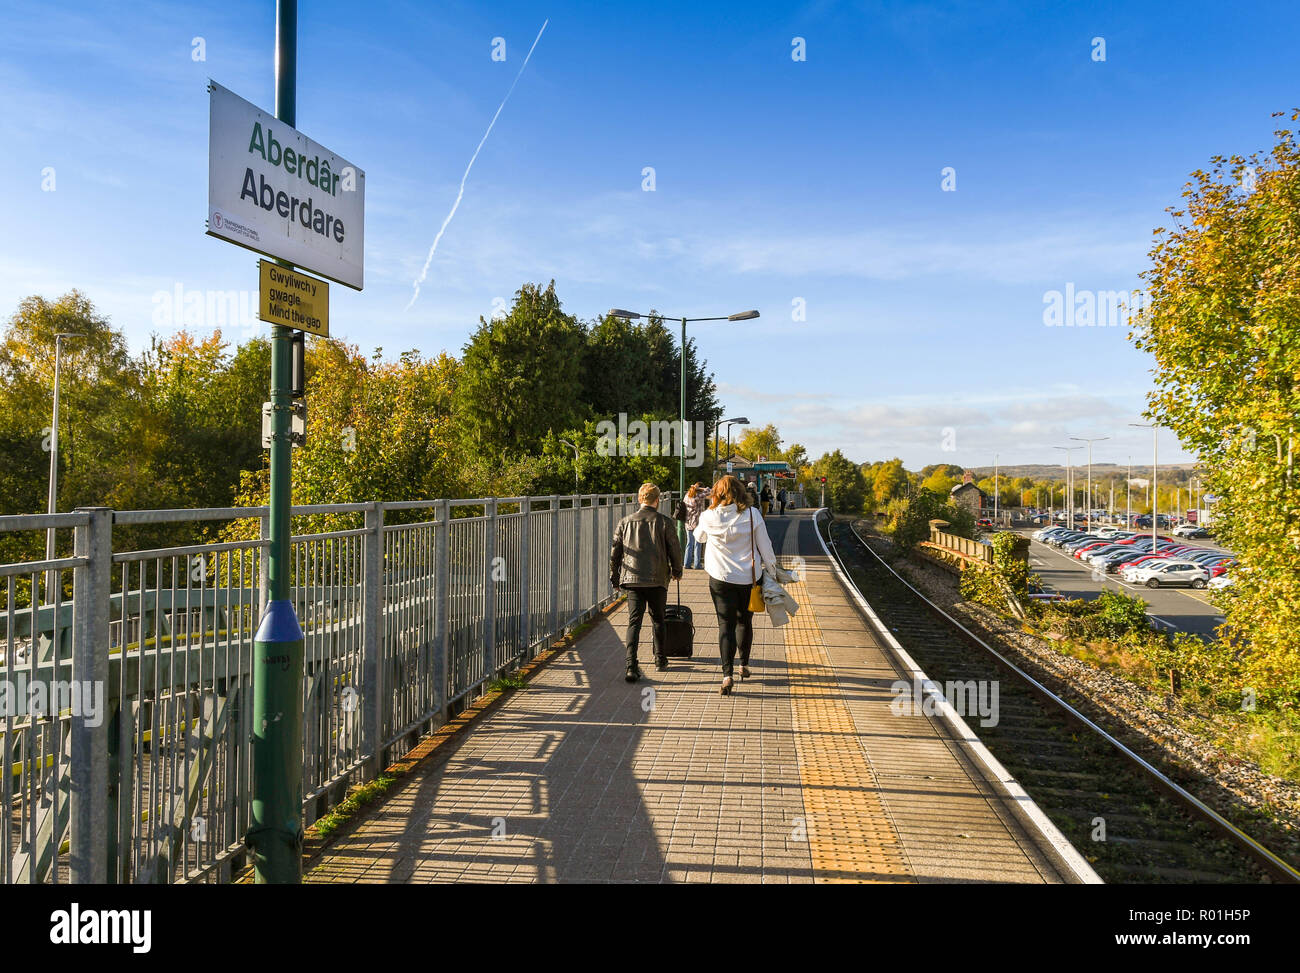 ABERDARE, WALES - OCTOBER 2018: Commuters wallking along the single platform on the railway station in Aberdare. Stock Photo